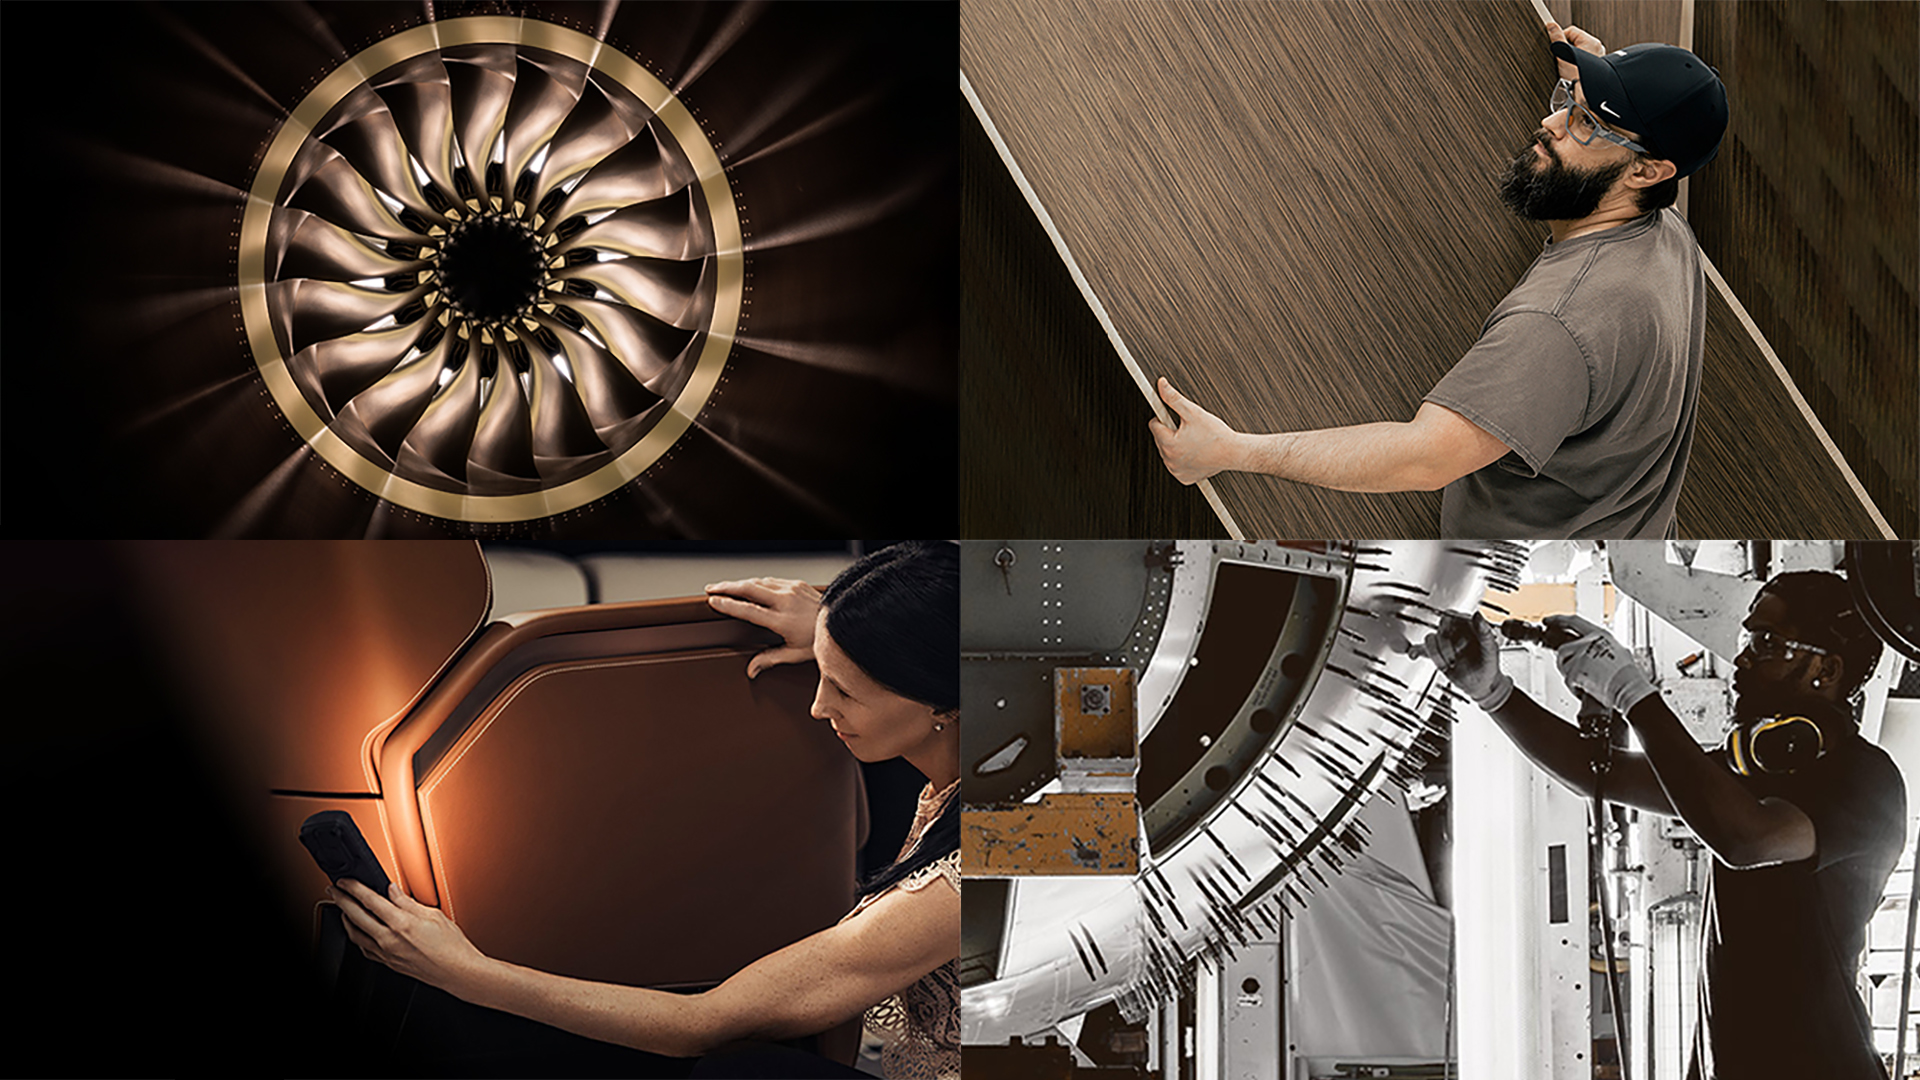 Collage of a workers assembling aircraft parts